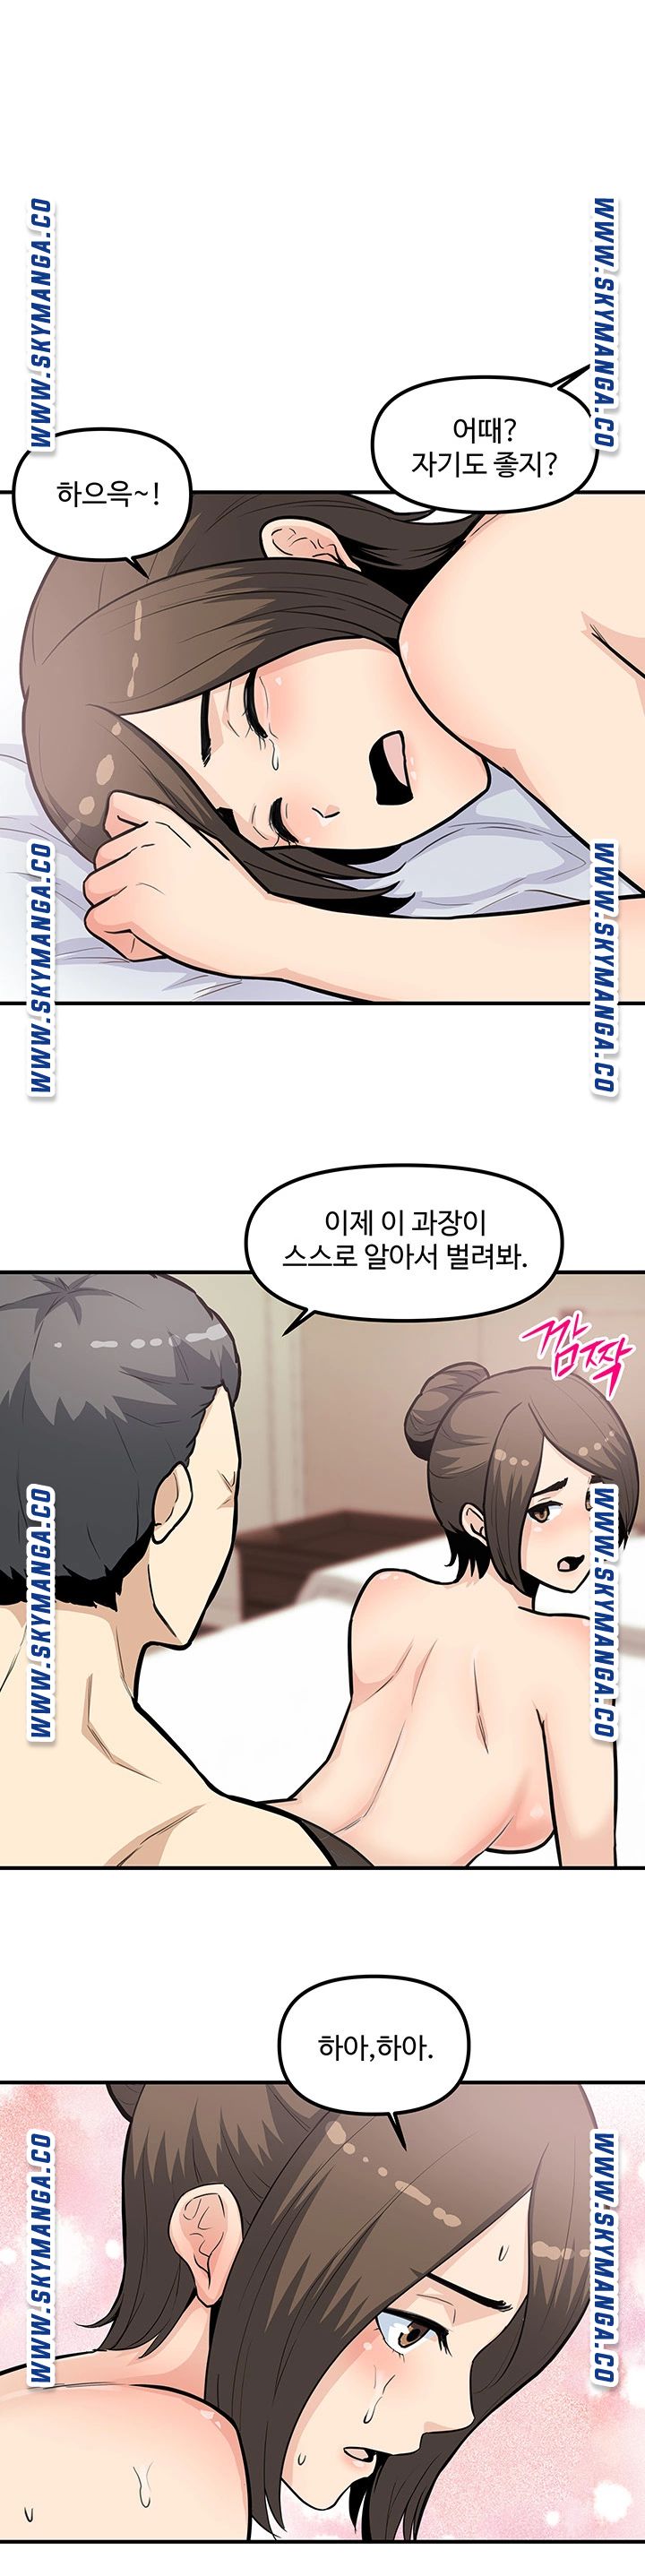 Office Bible Raw - Chapter 26 Page 1